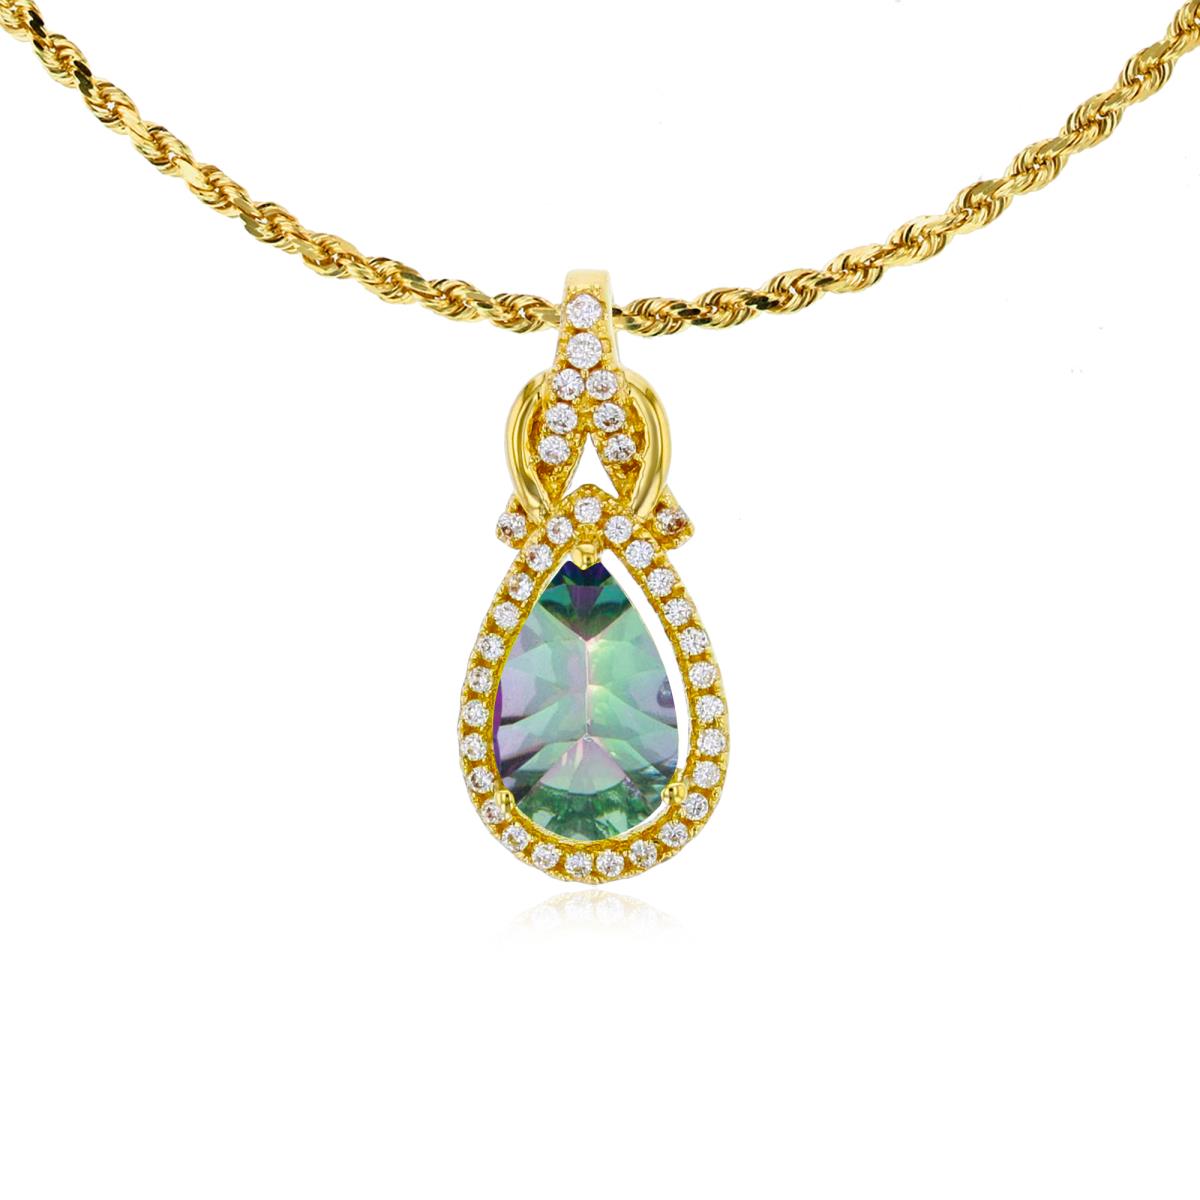 14K Yellow Gold 8x5mm Pear Cut Mystic Green Topaz & 0.11 CTTW Rnd Diamond Knot 18" Rope Chain Necklace